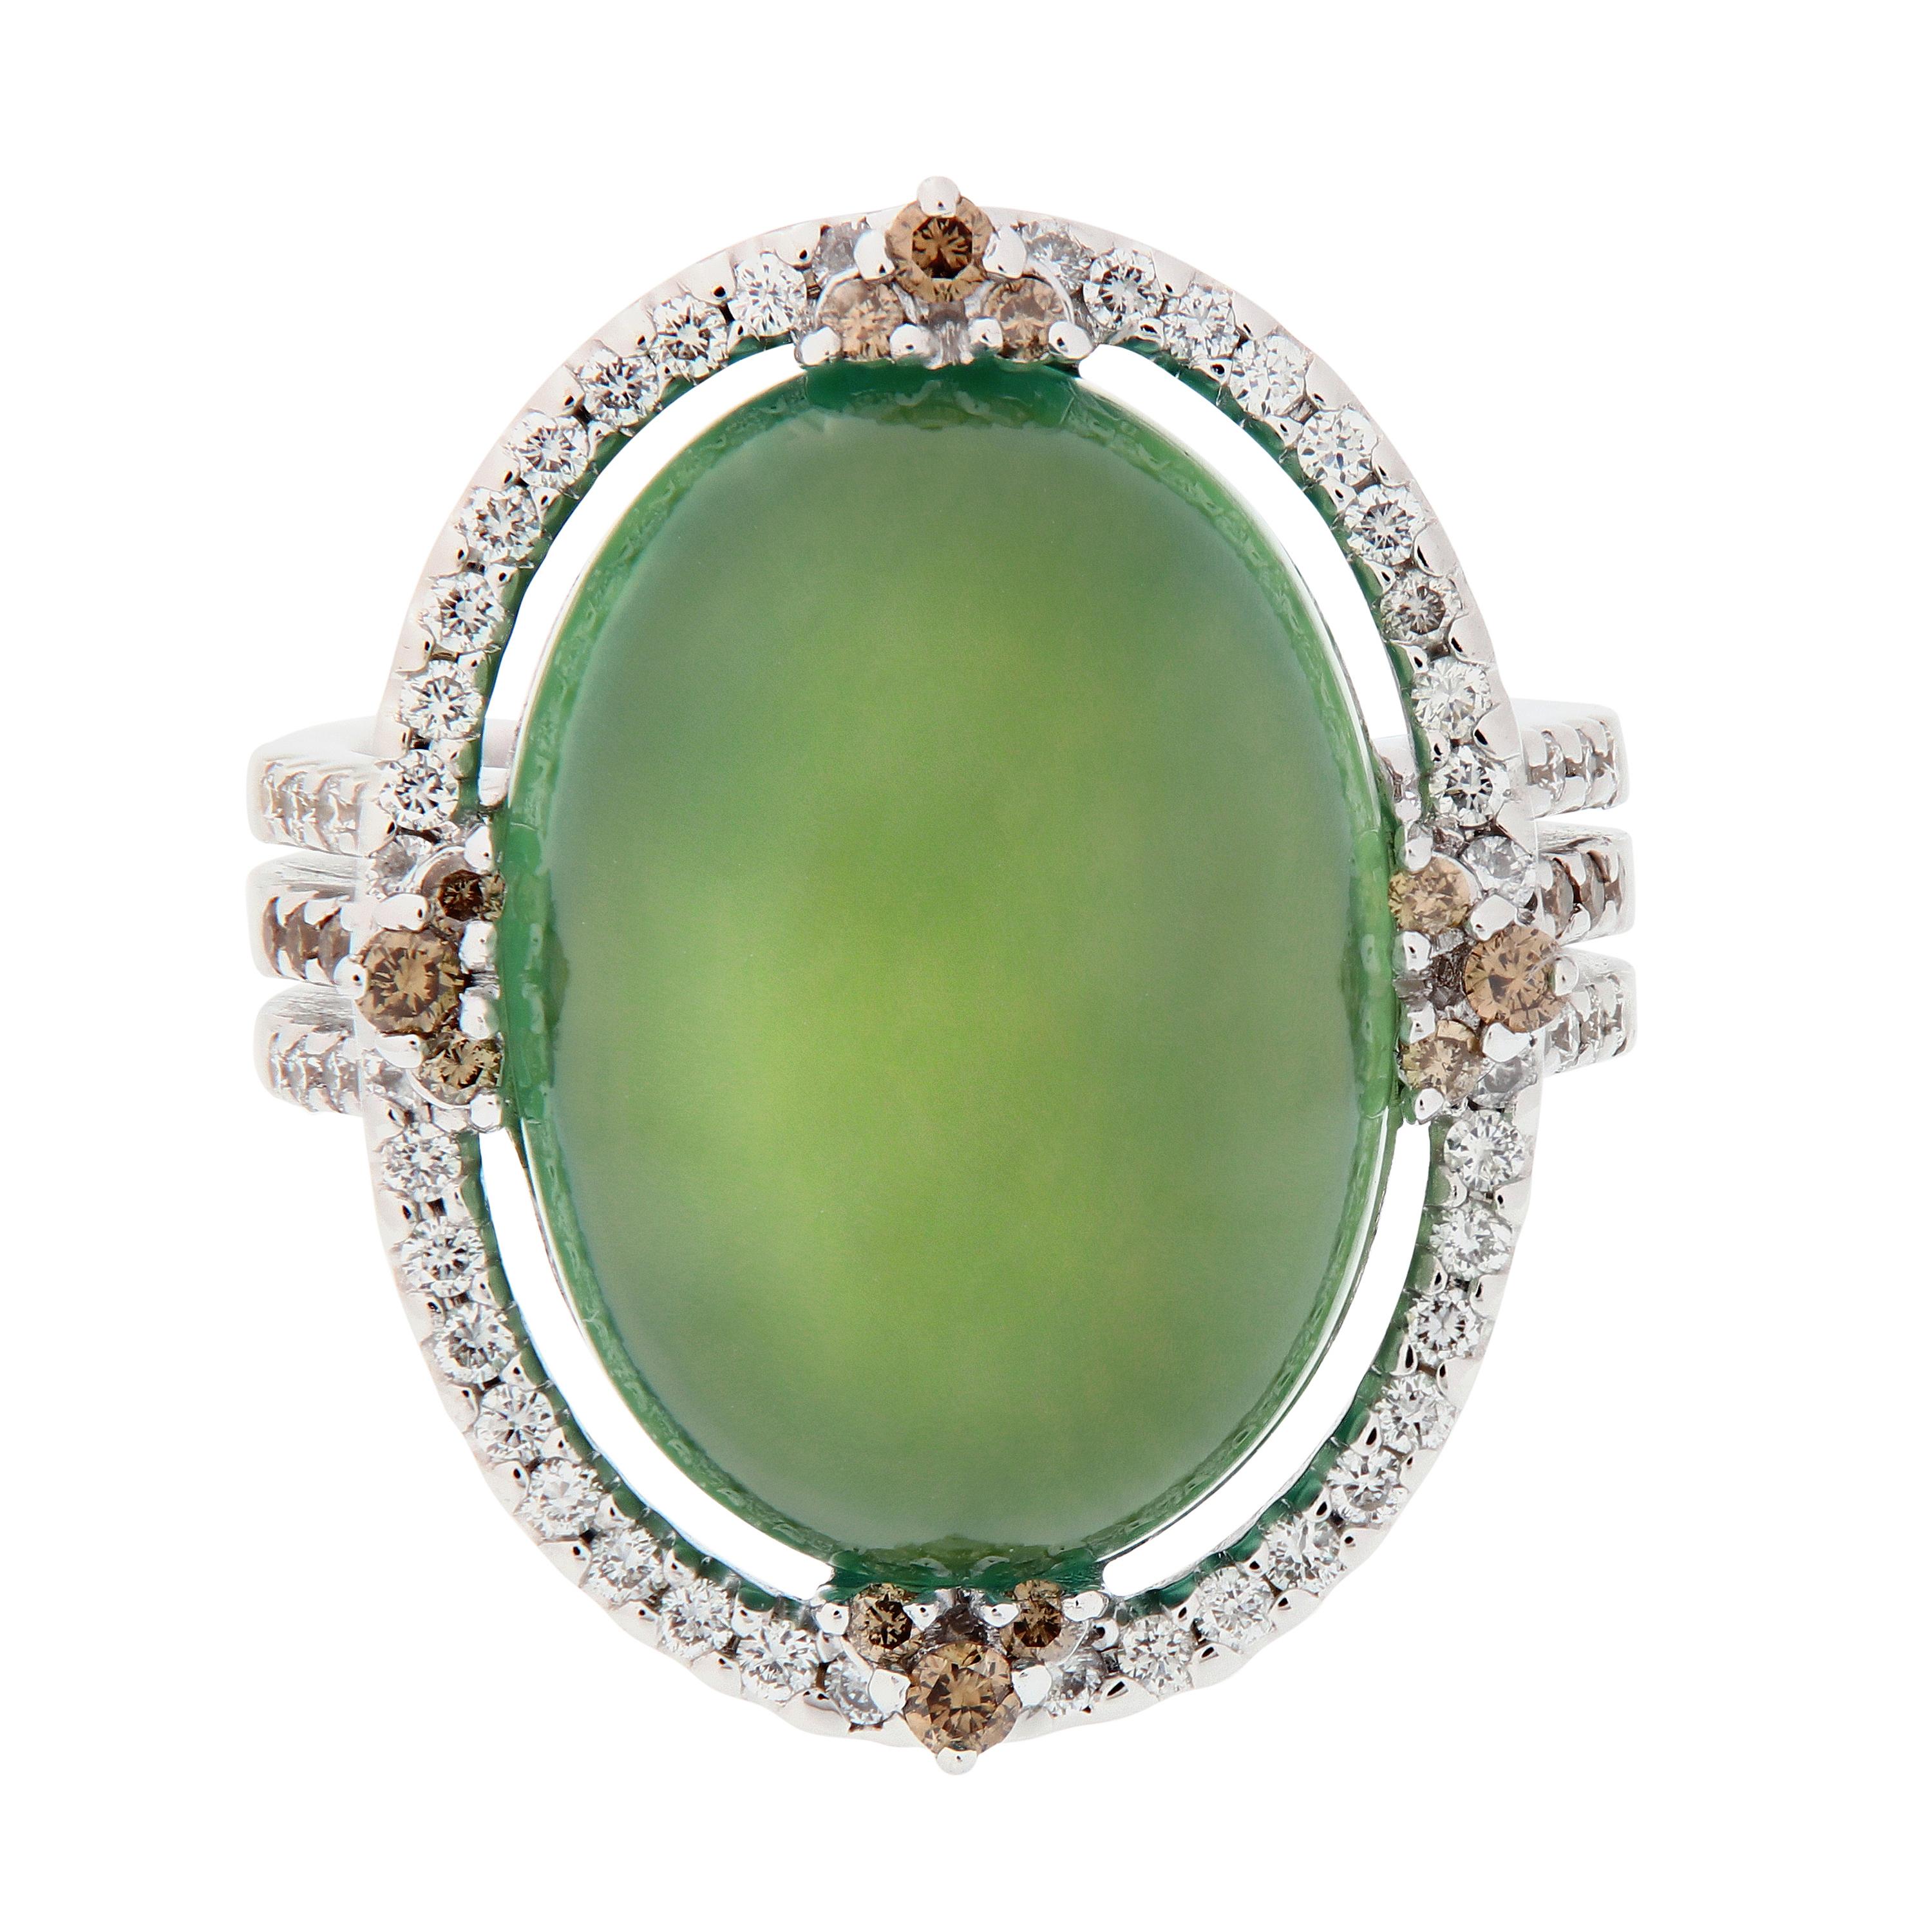 This 18k white gold ring centers around a cabochon cut Prehnite. An intriguing gemstone that features a unique green glow and is known as the stone of prophecy, aiding in spiritual communication through meditation. Center stone is accented with